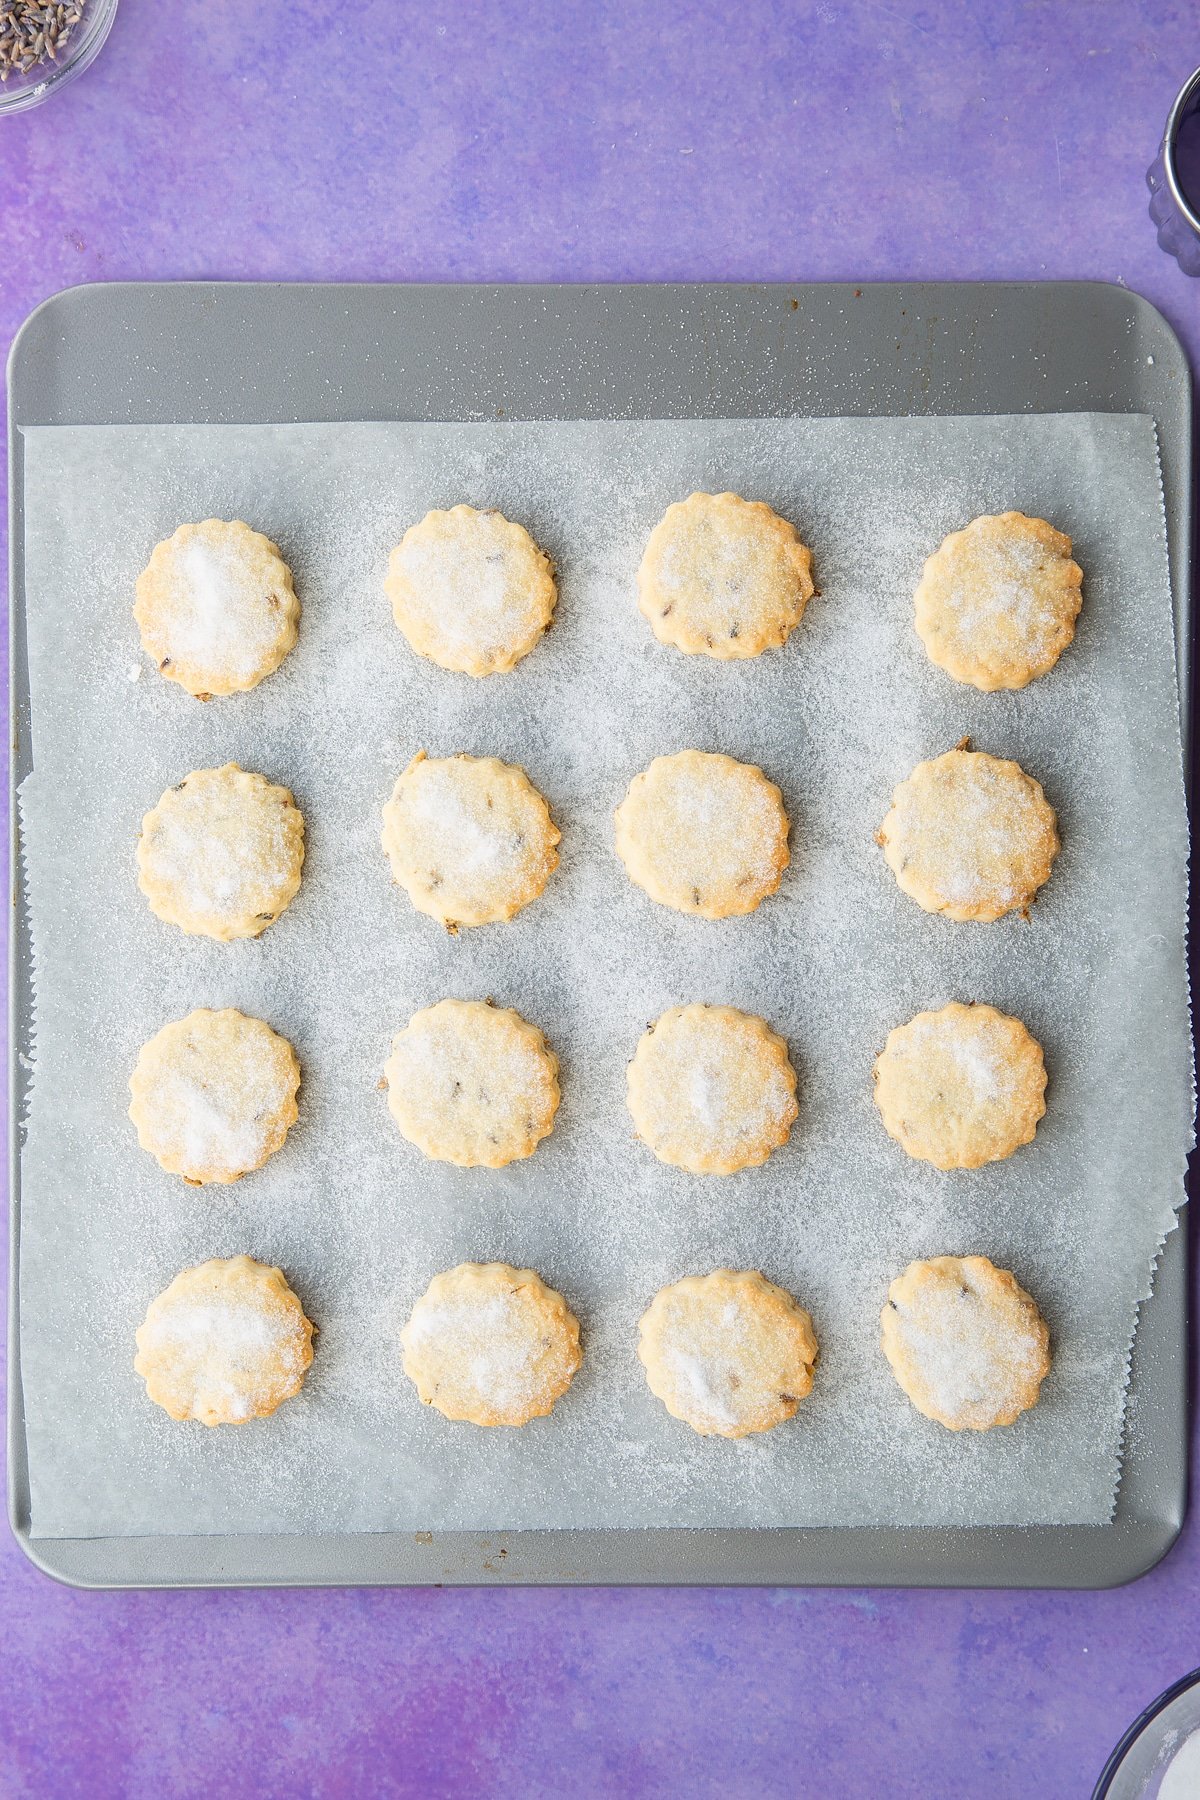 Lavender shortbread cookies freshly baked on a tray.